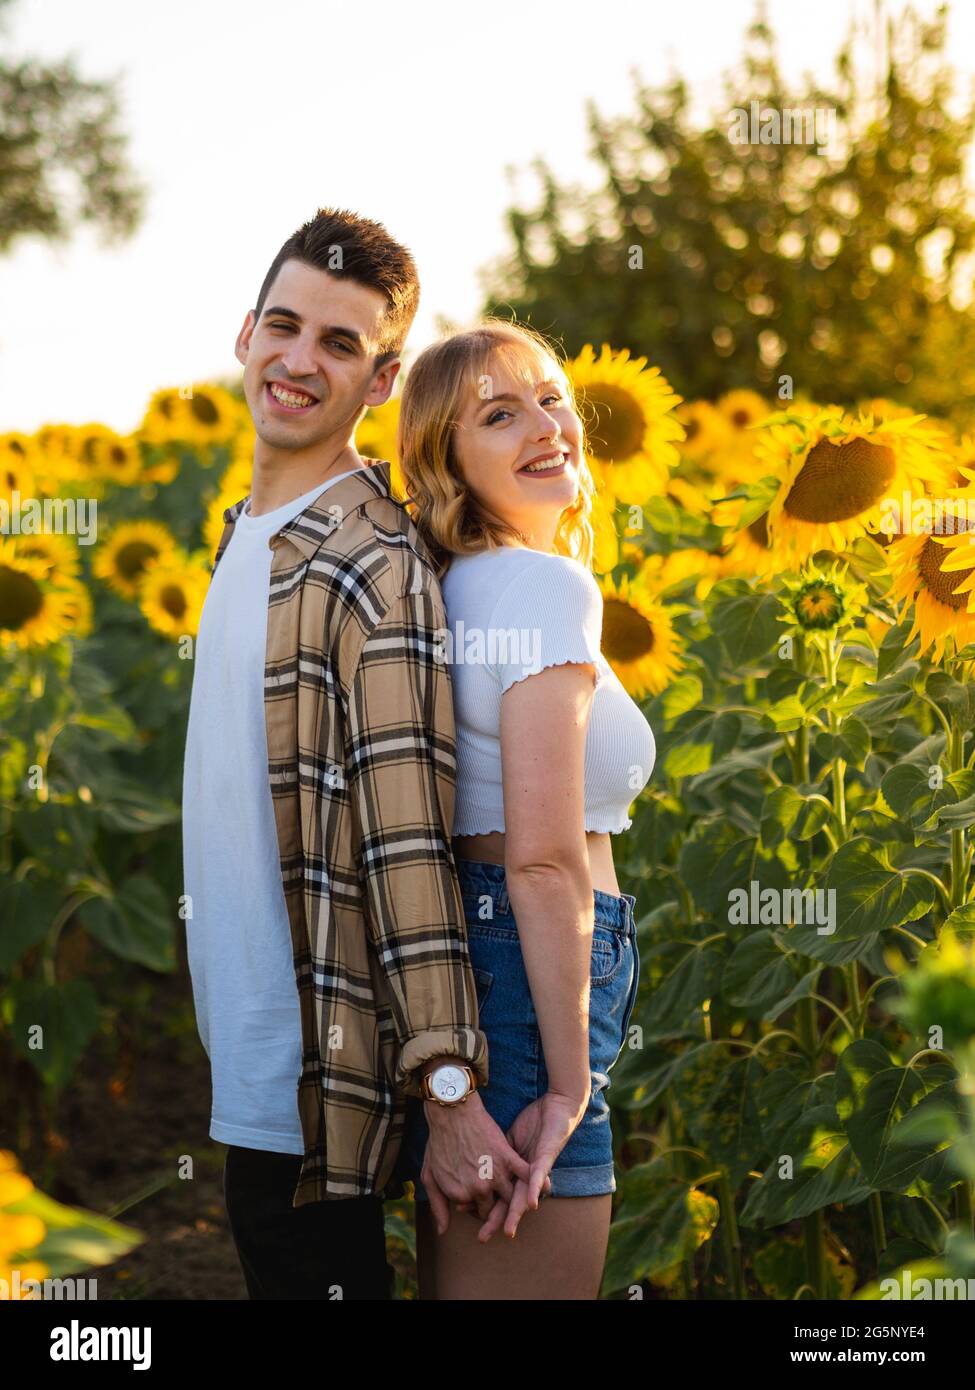 Cropped Portrait Of A Young Couple Standing Together And Posing On The  Street During The Day Stock Photo - Download Image Now - iStock